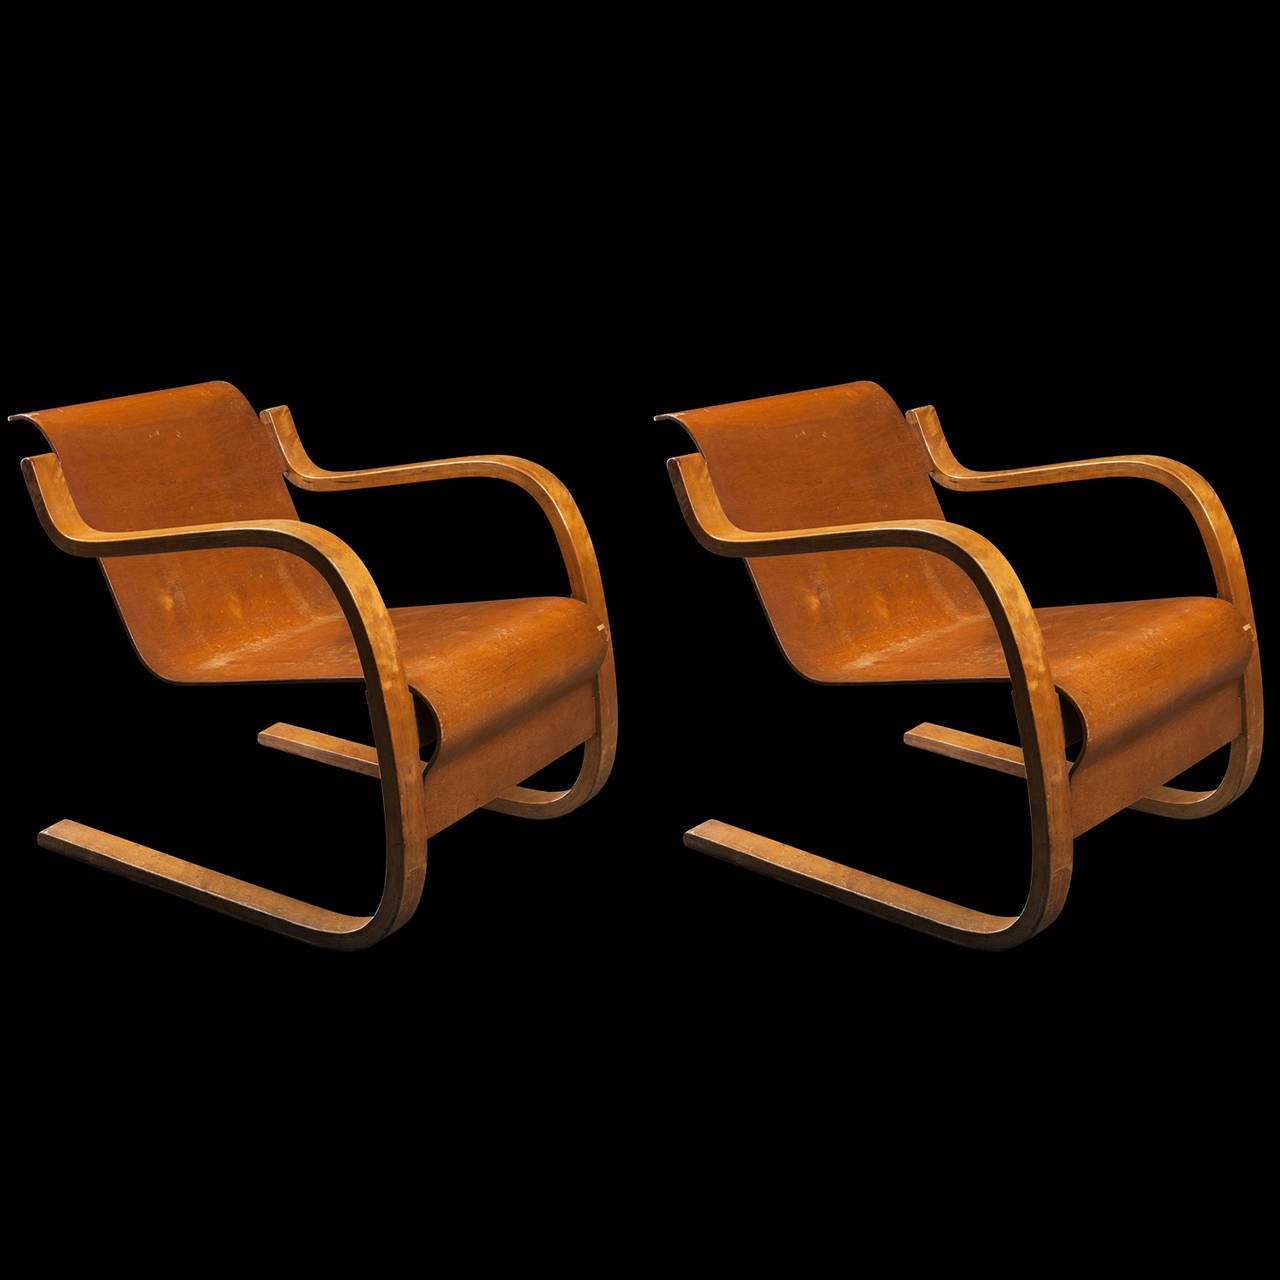 Pair of model 31 armchairs by Alvar Aalto. Birch plywood laminate on a cantilever structure. Designed for the Paimio Sanitarium.